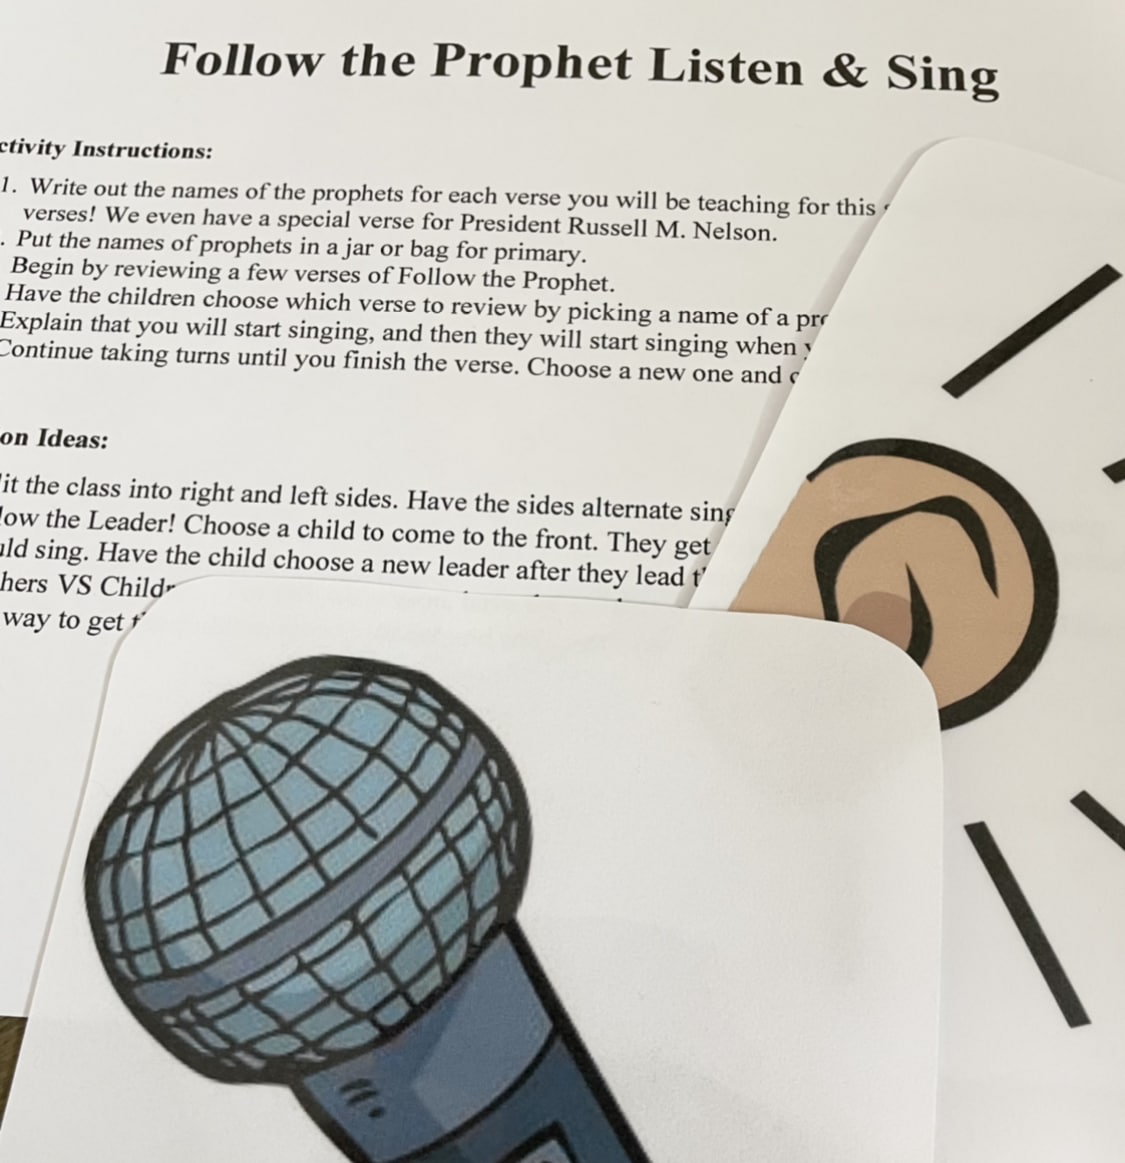 Follow the Prophet Listen & Sing singing time ideas for LDS Primary music leaders